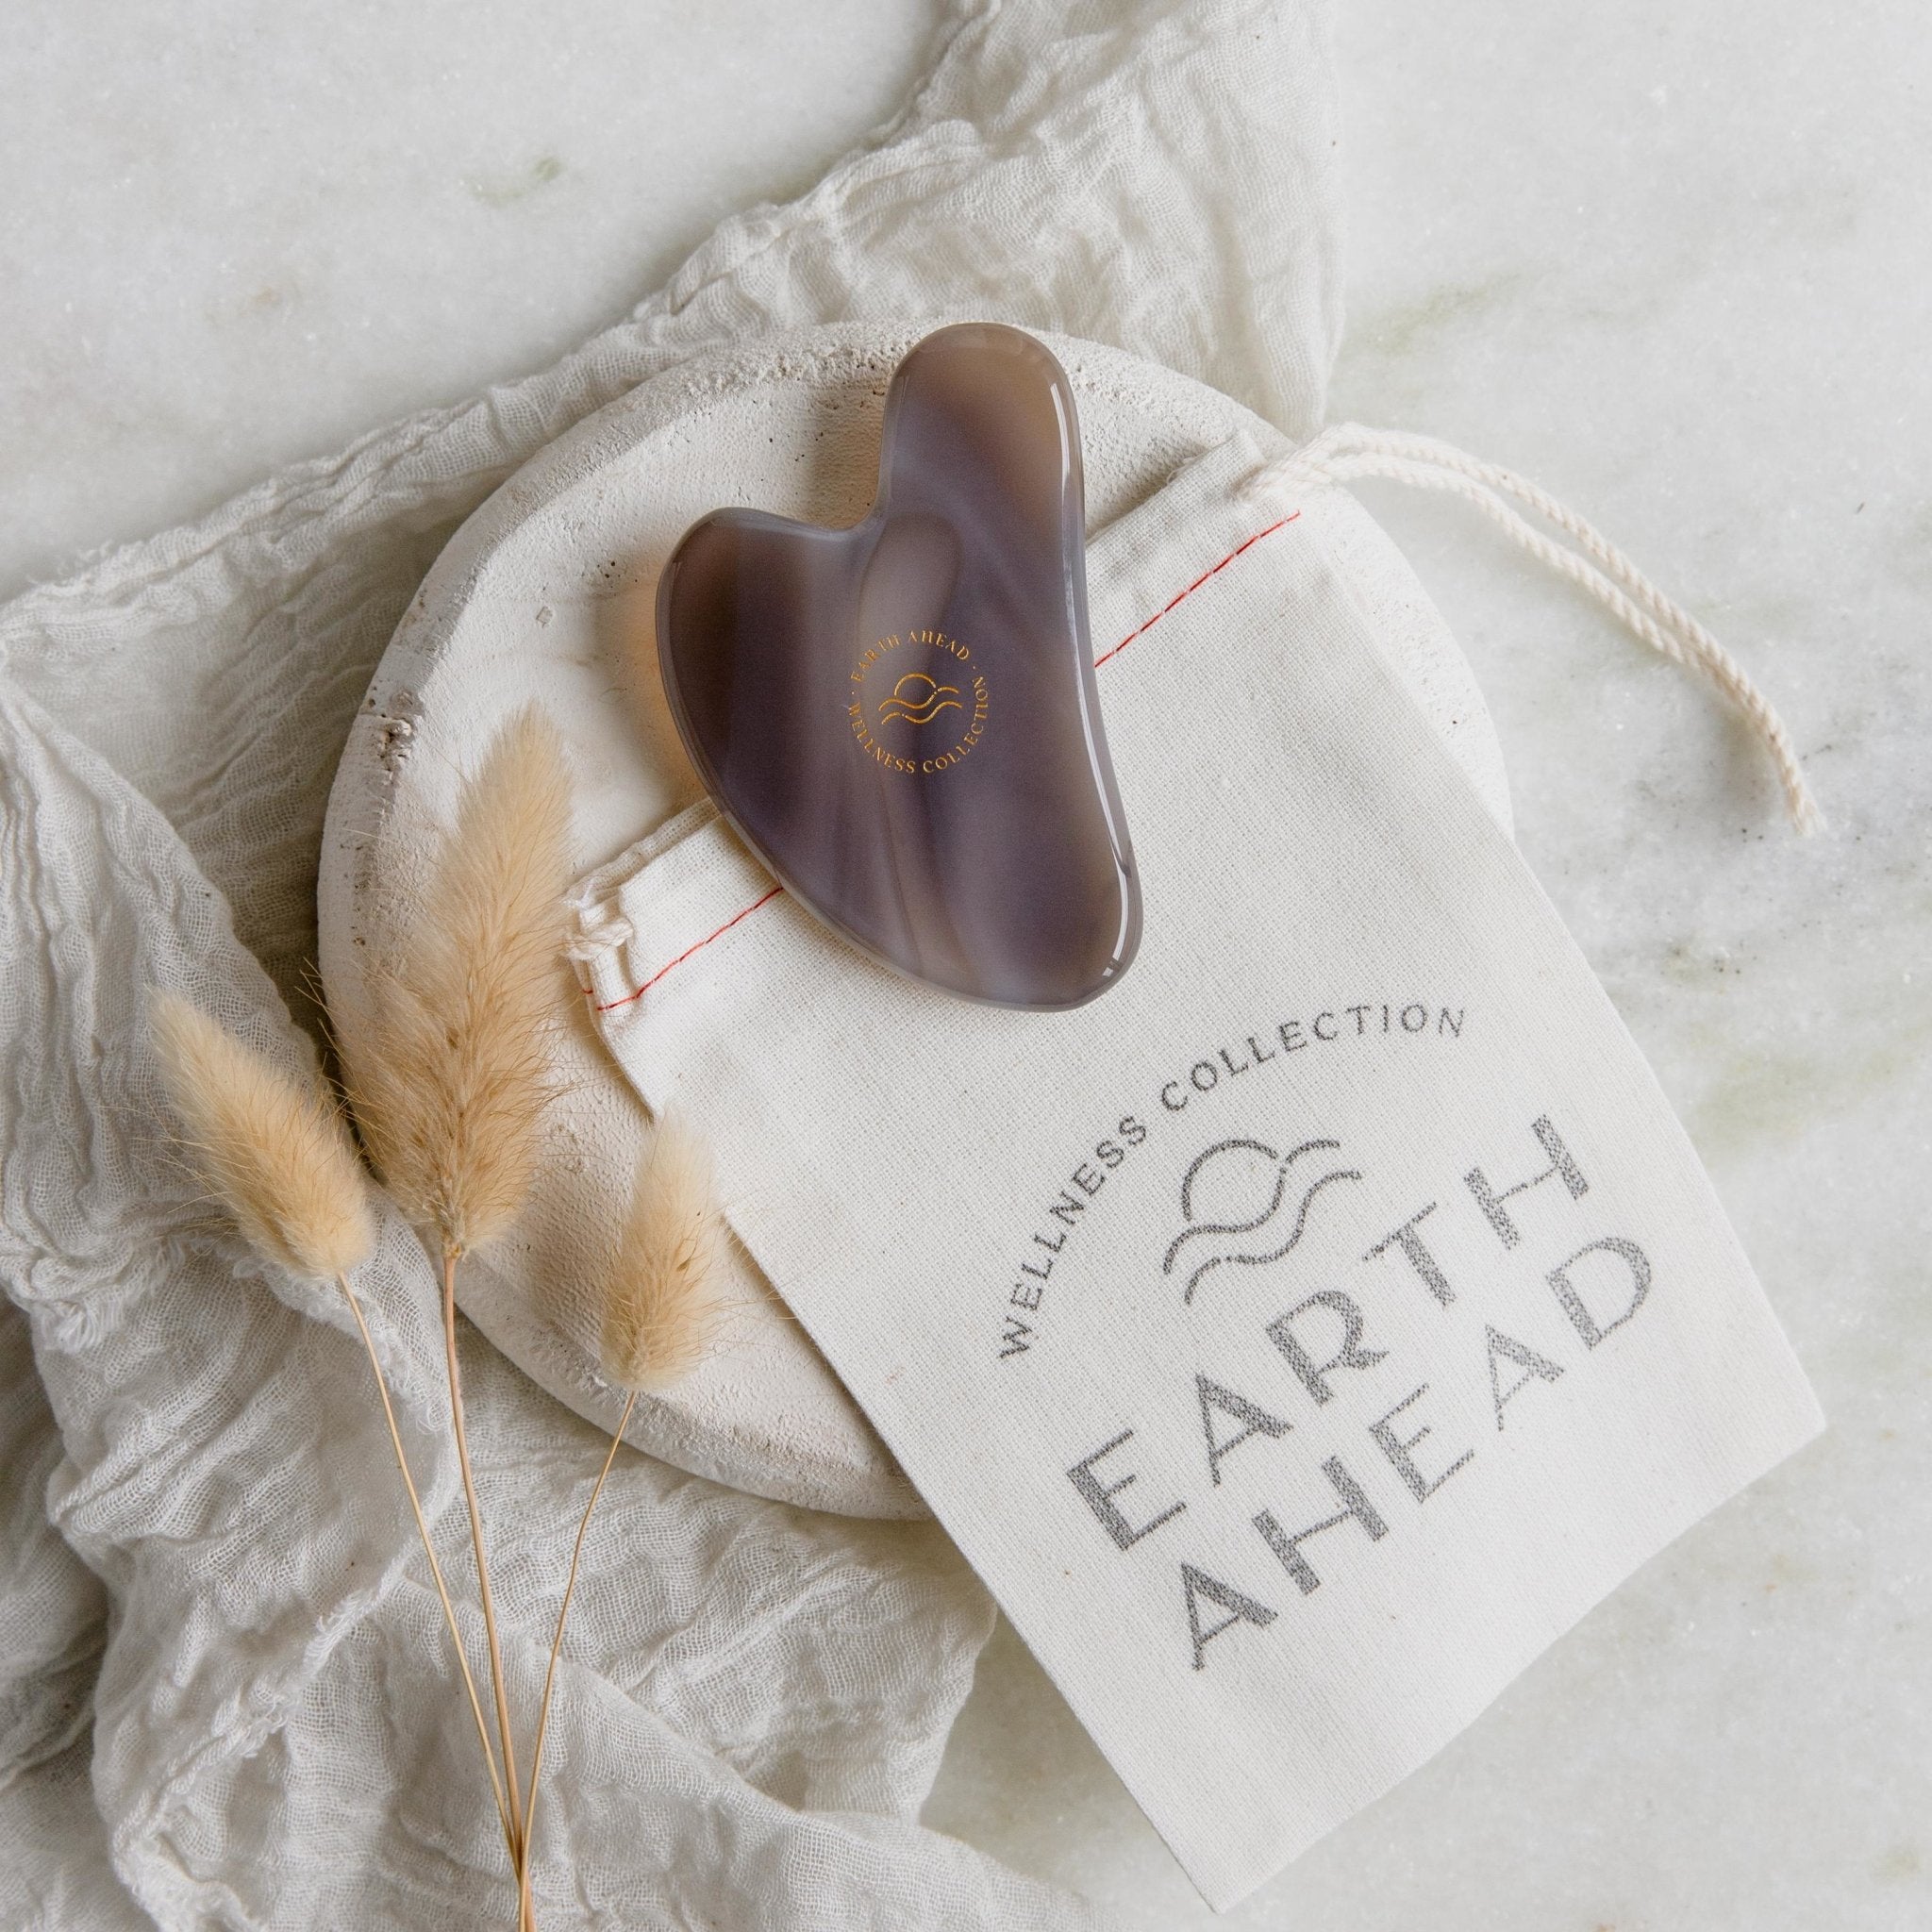 Natural stone - Gaia Grey Agate Gua Sha Facial Massage Tool with Wellness Collection cotton pouch - Earth Ahead